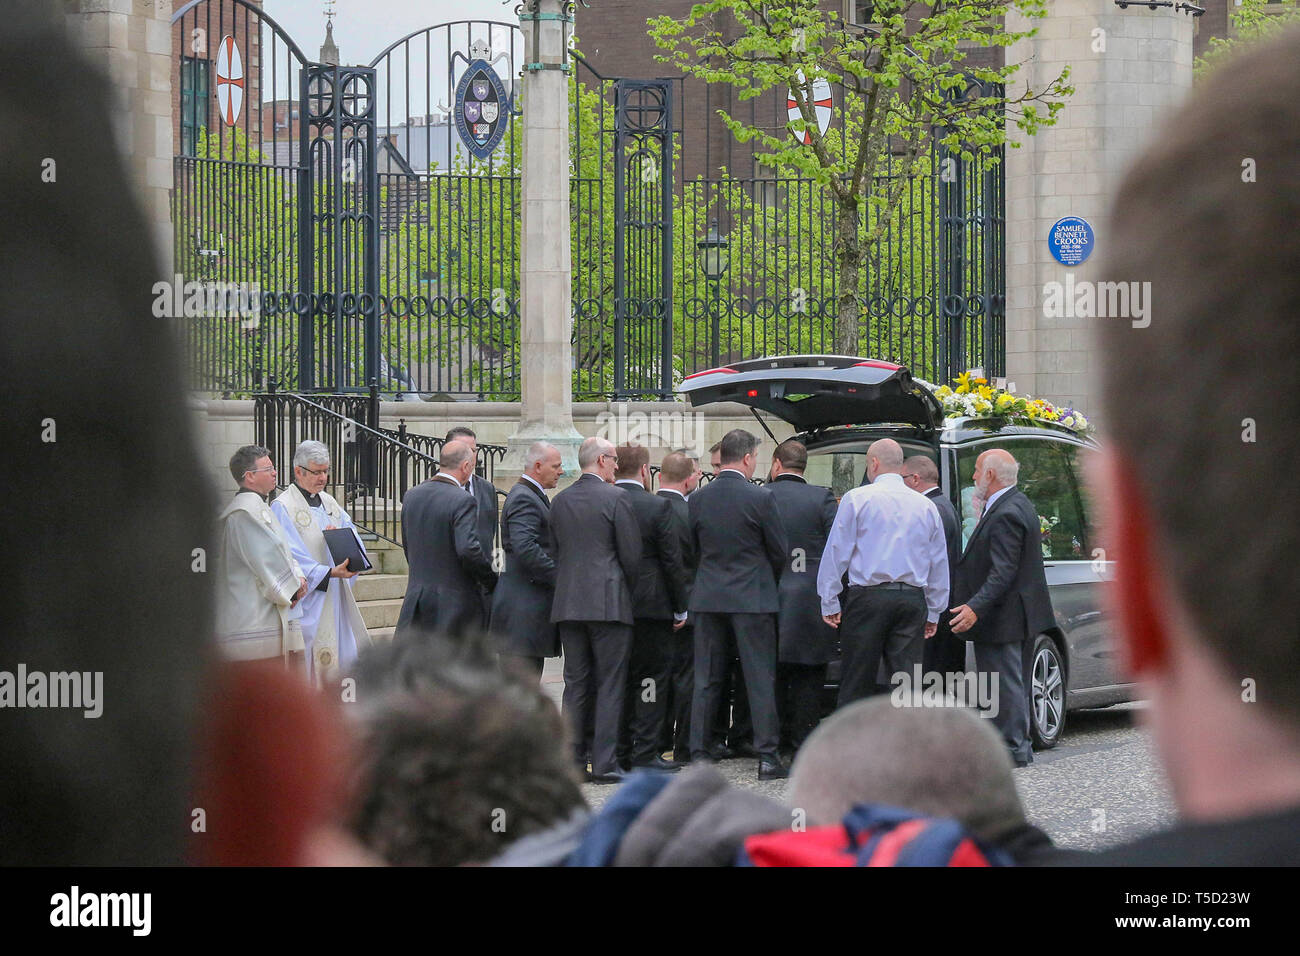 Belfast, Northern Ireland, UK. 24 April 2019. The funeral of Lyra McKee took place at St Anne's Cathedral in Belfast. The 29 year-old journalist was murdered in the Creggan Estate in Londonderry on Thursday night whilst observing rioting. A dissident republican gunman opened fire in the direction of police and Ms McKee was fatally wounded. Credit:CAZIMB/Alamy Live News. Stock Photo